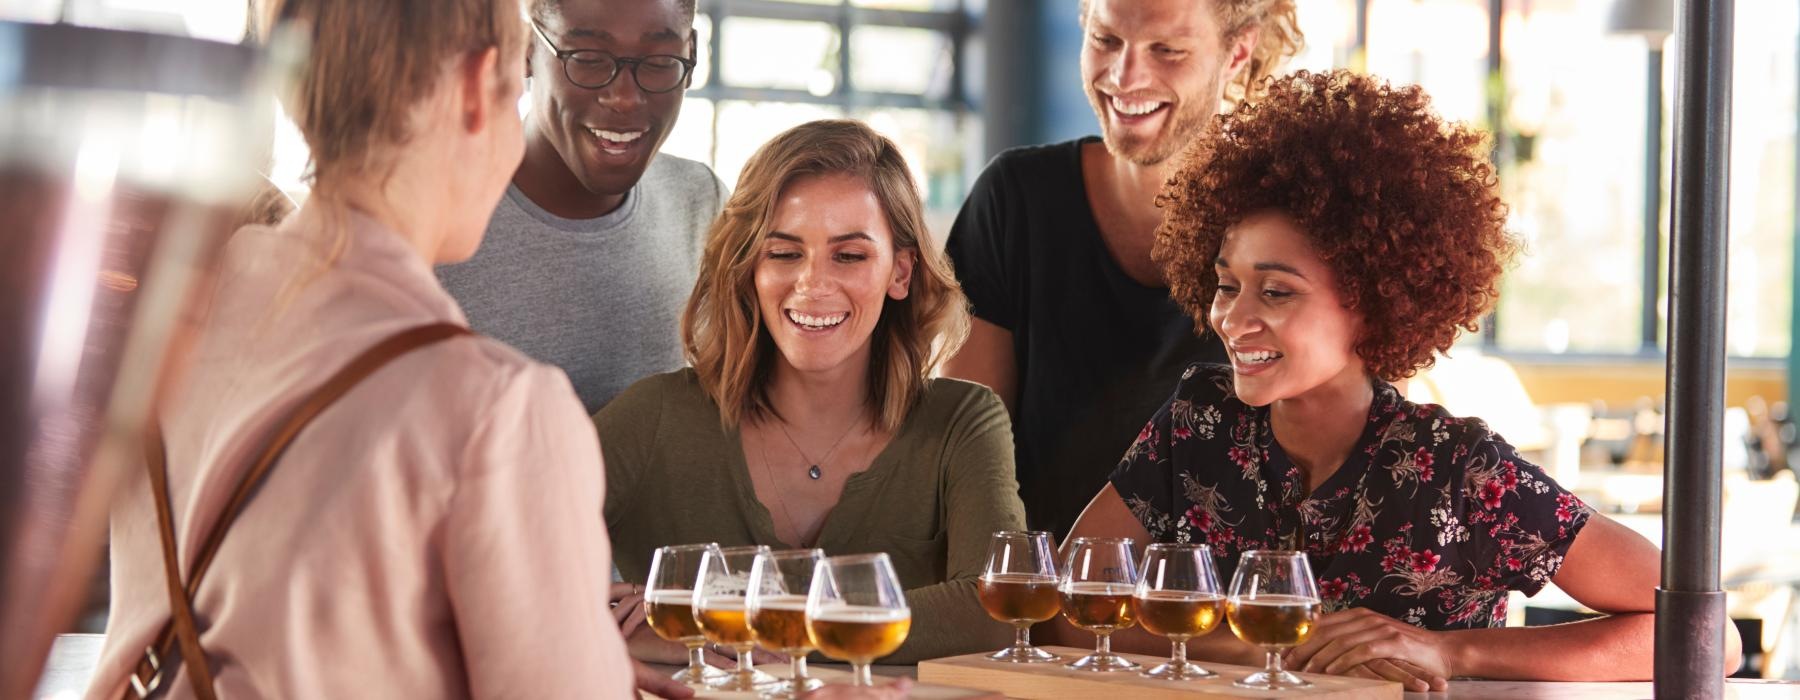 a group of people drinking wine